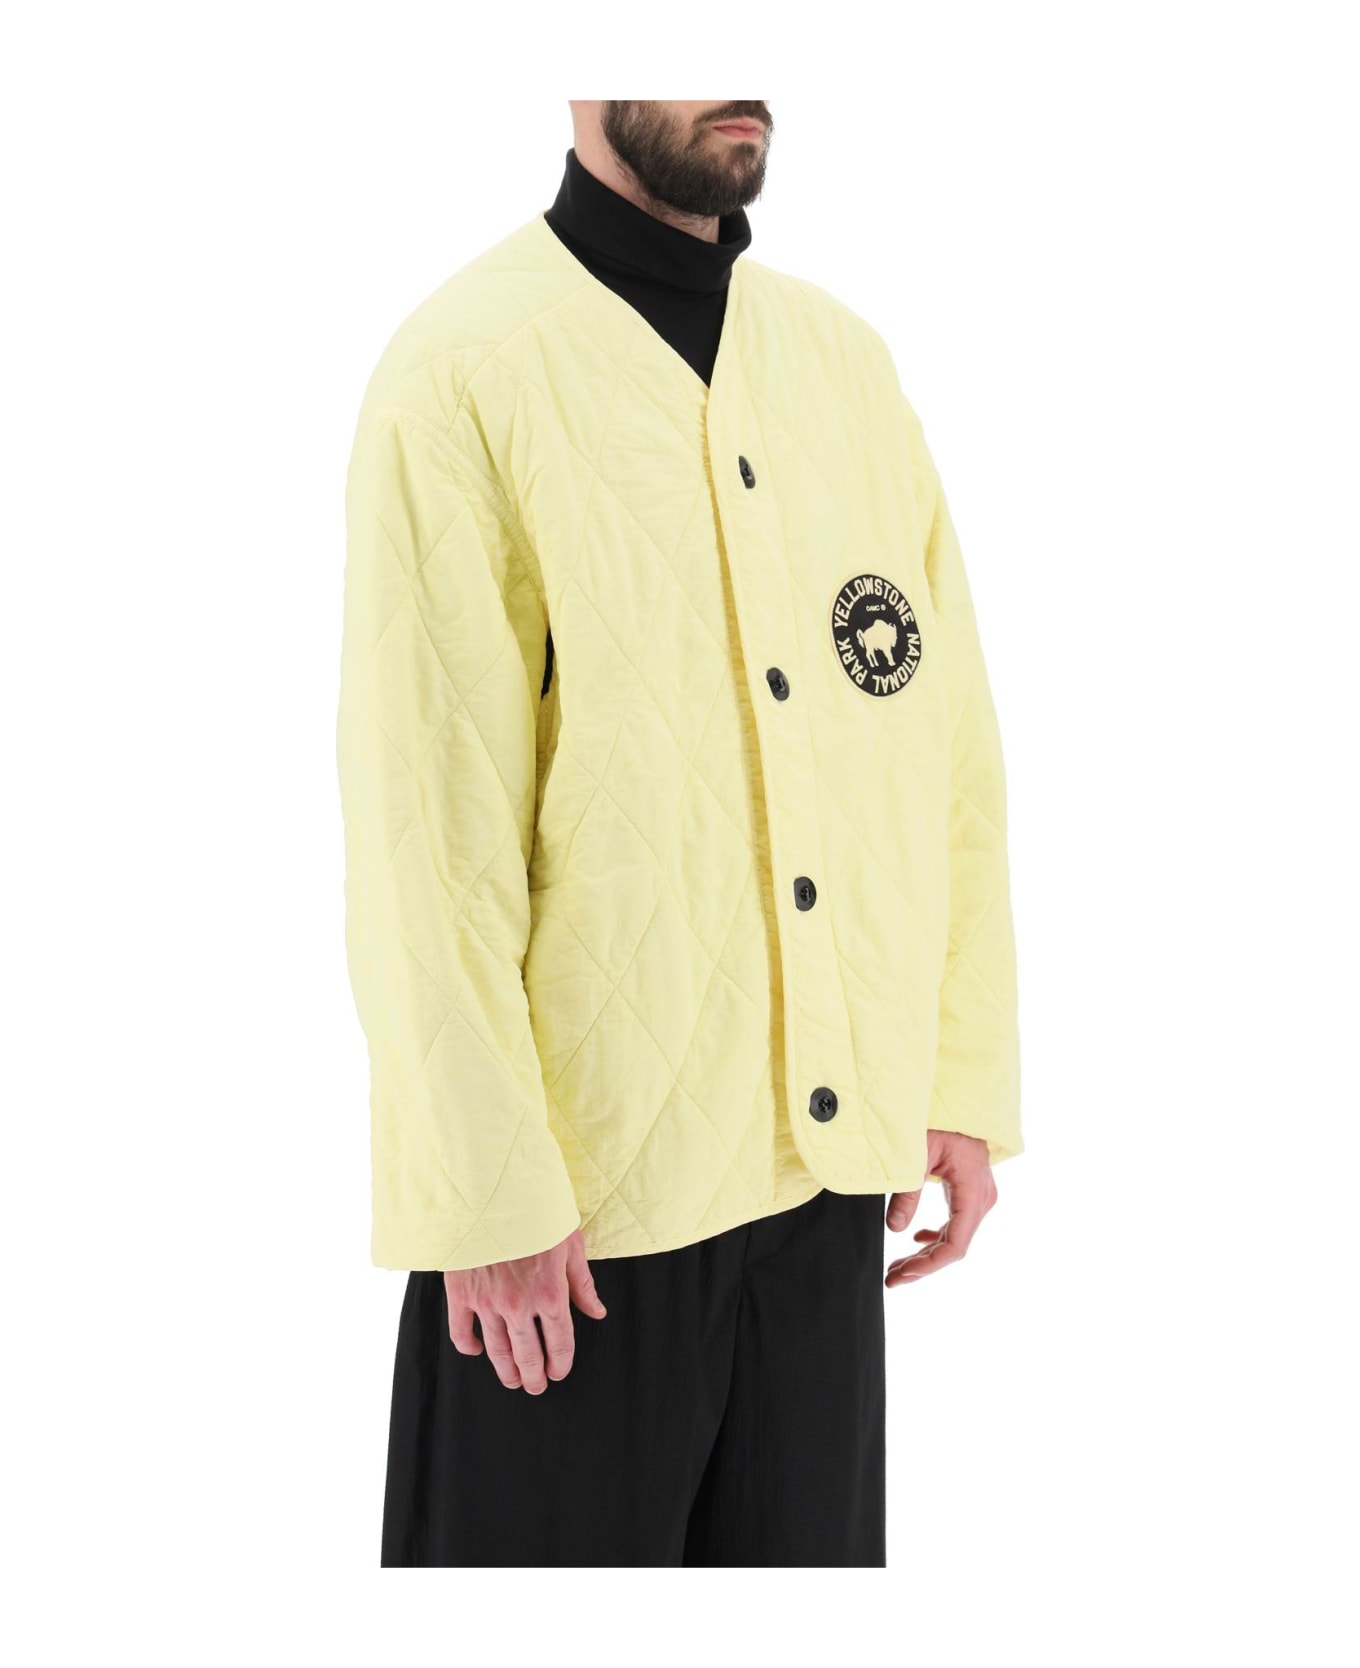 OAMC 'denali' Quilted Jacket With Print And Embroidery At Back - LIGHT PASTEL YELLOW (Yellow)